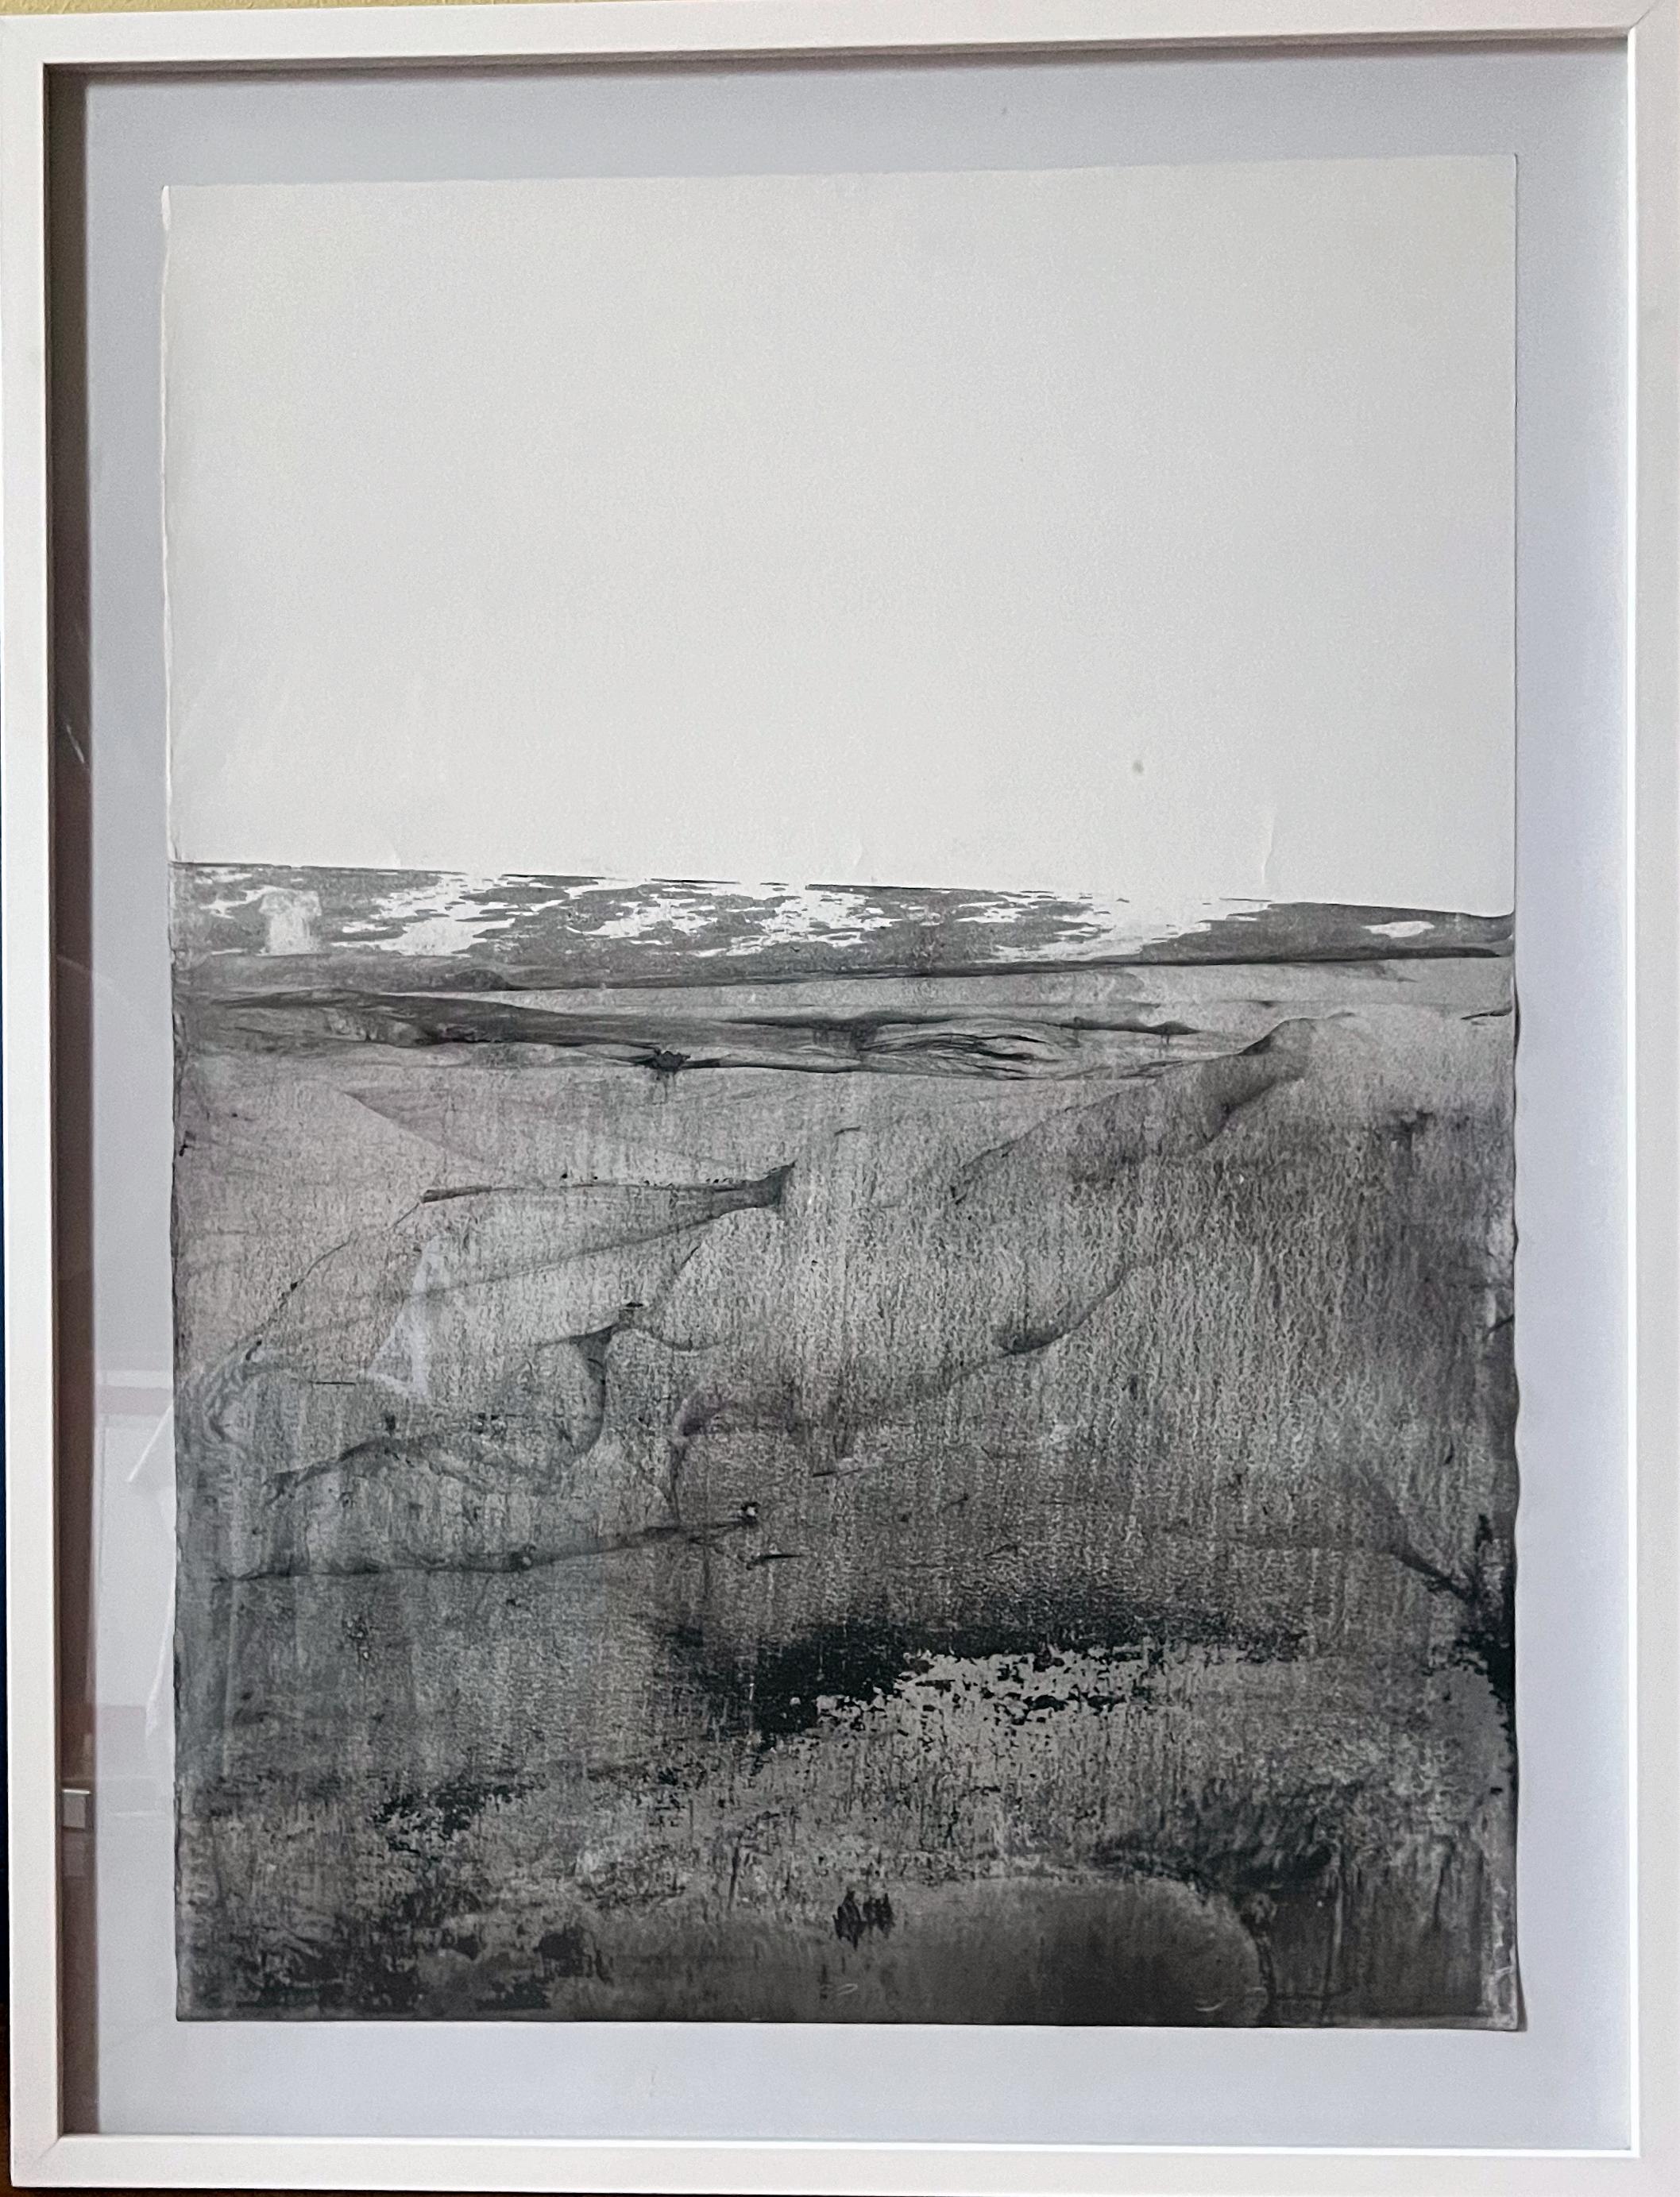 Landscape BW

Mineral Oxide on Paper
55x74 cm
framed 68x88 cm
Original Art 
Ready to Hang


The use of natural materials such as mineral oxide powder connects the work to a dimension of respect for the environment and connection with nature. The